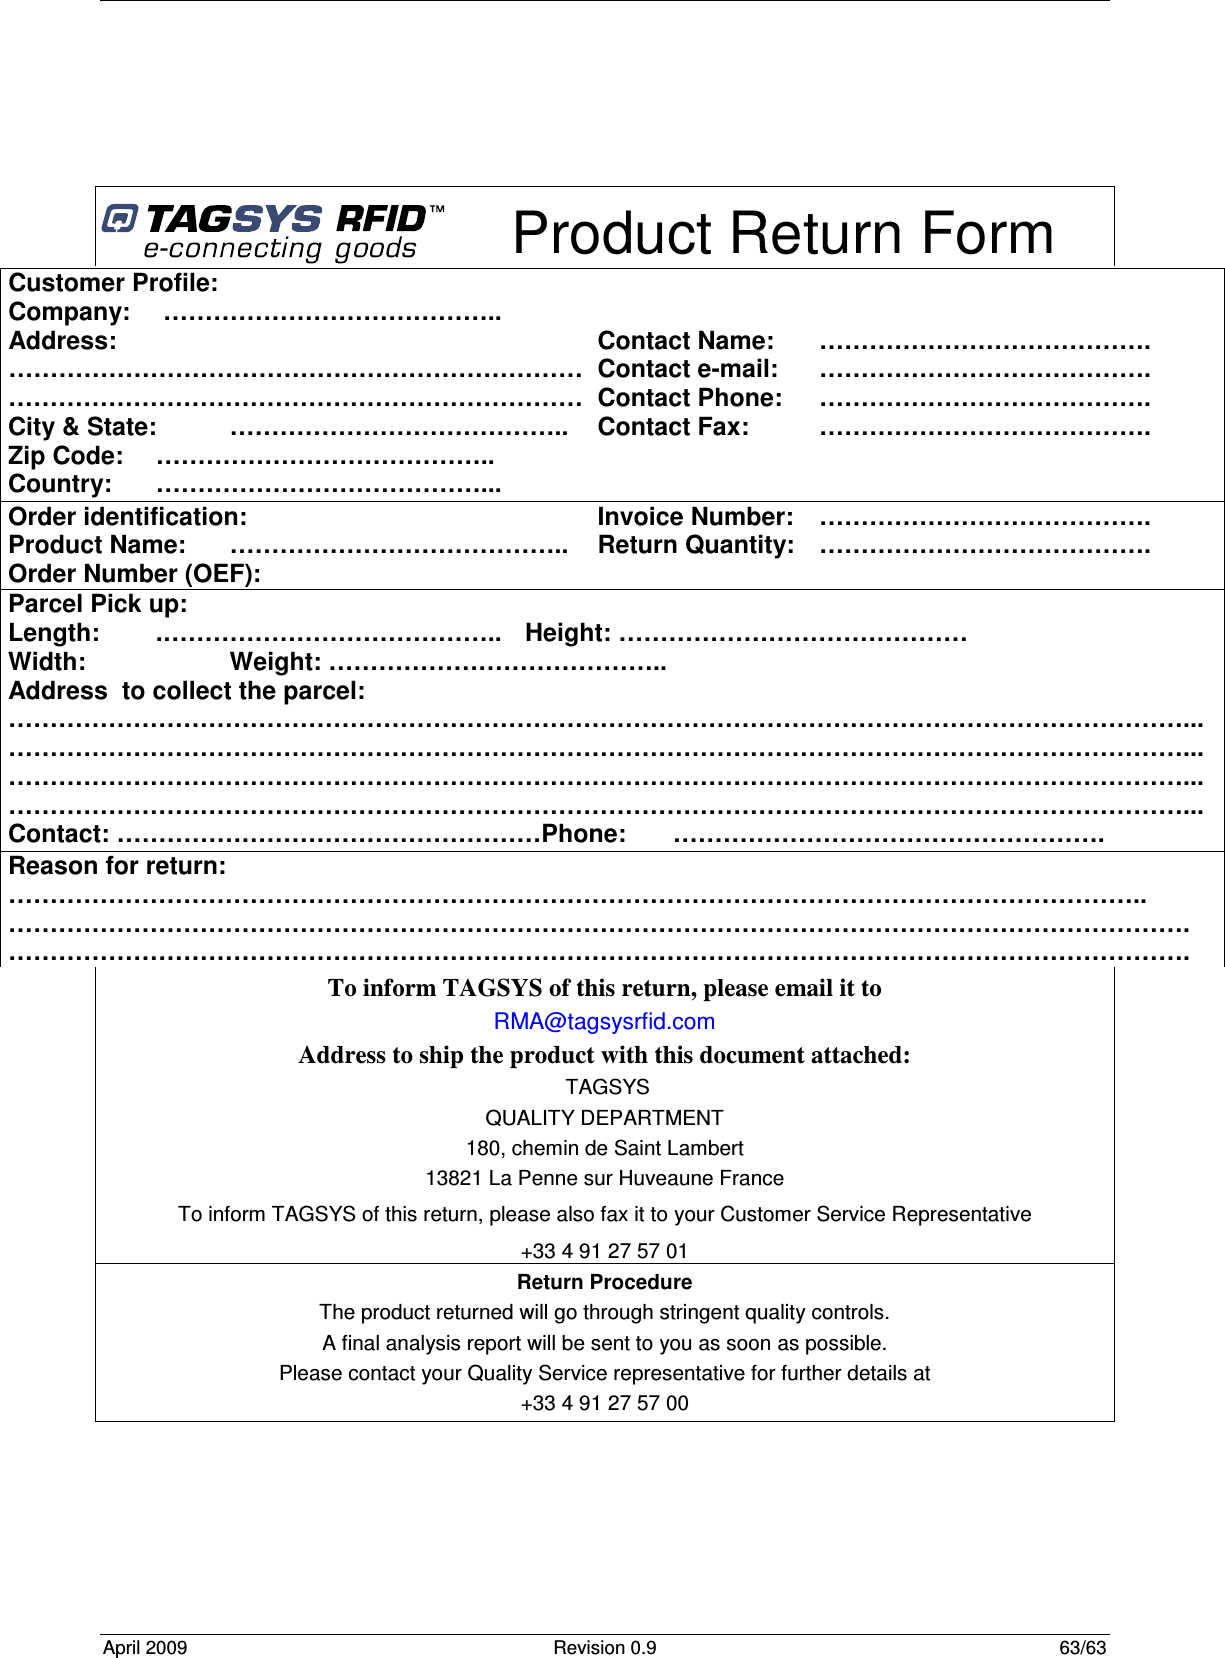  April 2009  Revision 0.9  63/63       Product Return Form To inform TAGSYS of this return, please email it to RMA@tagsysrfid.com Address to ship the product with this document attached:  TAGSYS QUALITY DEPARTMENT 180, chemin de Saint Lambert 13821 La Penne sur Huveaune France To inform TAGSYS of this return, please also fax it to your Customer Service Representative +33 4 91 27 57 01 Return Procedure The product returned will go through stringent quality controls. A final analysis report will be sent to you as soon as possible. Please contact your Quality Service representative for further details at  +33 4 91 27 57 00  Customer Profile: Company:   ………………………………….. Address:      …………………………………………………………… …………………………………………………………… City &amp; State:  ………………………………….. Zip Code:  ………………………………….. Country:  …………………………………...   Contact Name:  …………………………………. Contact e-mail:   …………………………………. Contact Phone:  …………………………………. Contact Fax:  …………………………………. Order identification: Product Name:  ………………………………….. Order Number (OEF):   Invoice Number:  …………………………………. Return Quantity:   …………………………………. Parcel Pick up: Length:   .…………………………………..  Height: …………………………………… Width:     Weight: ………………………………….. Address  to collect the parcel: ……………………………………………………………………………………………………………………………... ……………………………………………………………………………………………………………………………... ……………………………………………………………………………………………………………………………... ……………………………………………………………………………………………………………………………... Contact: ……………………………………………Phone:   ……………………………………………. Reason for return: ……………………………………………………………………………………………………………………….. ……………………………………………………………………………………………………………………………. ……………………………………………………………………………………………………………………………. 